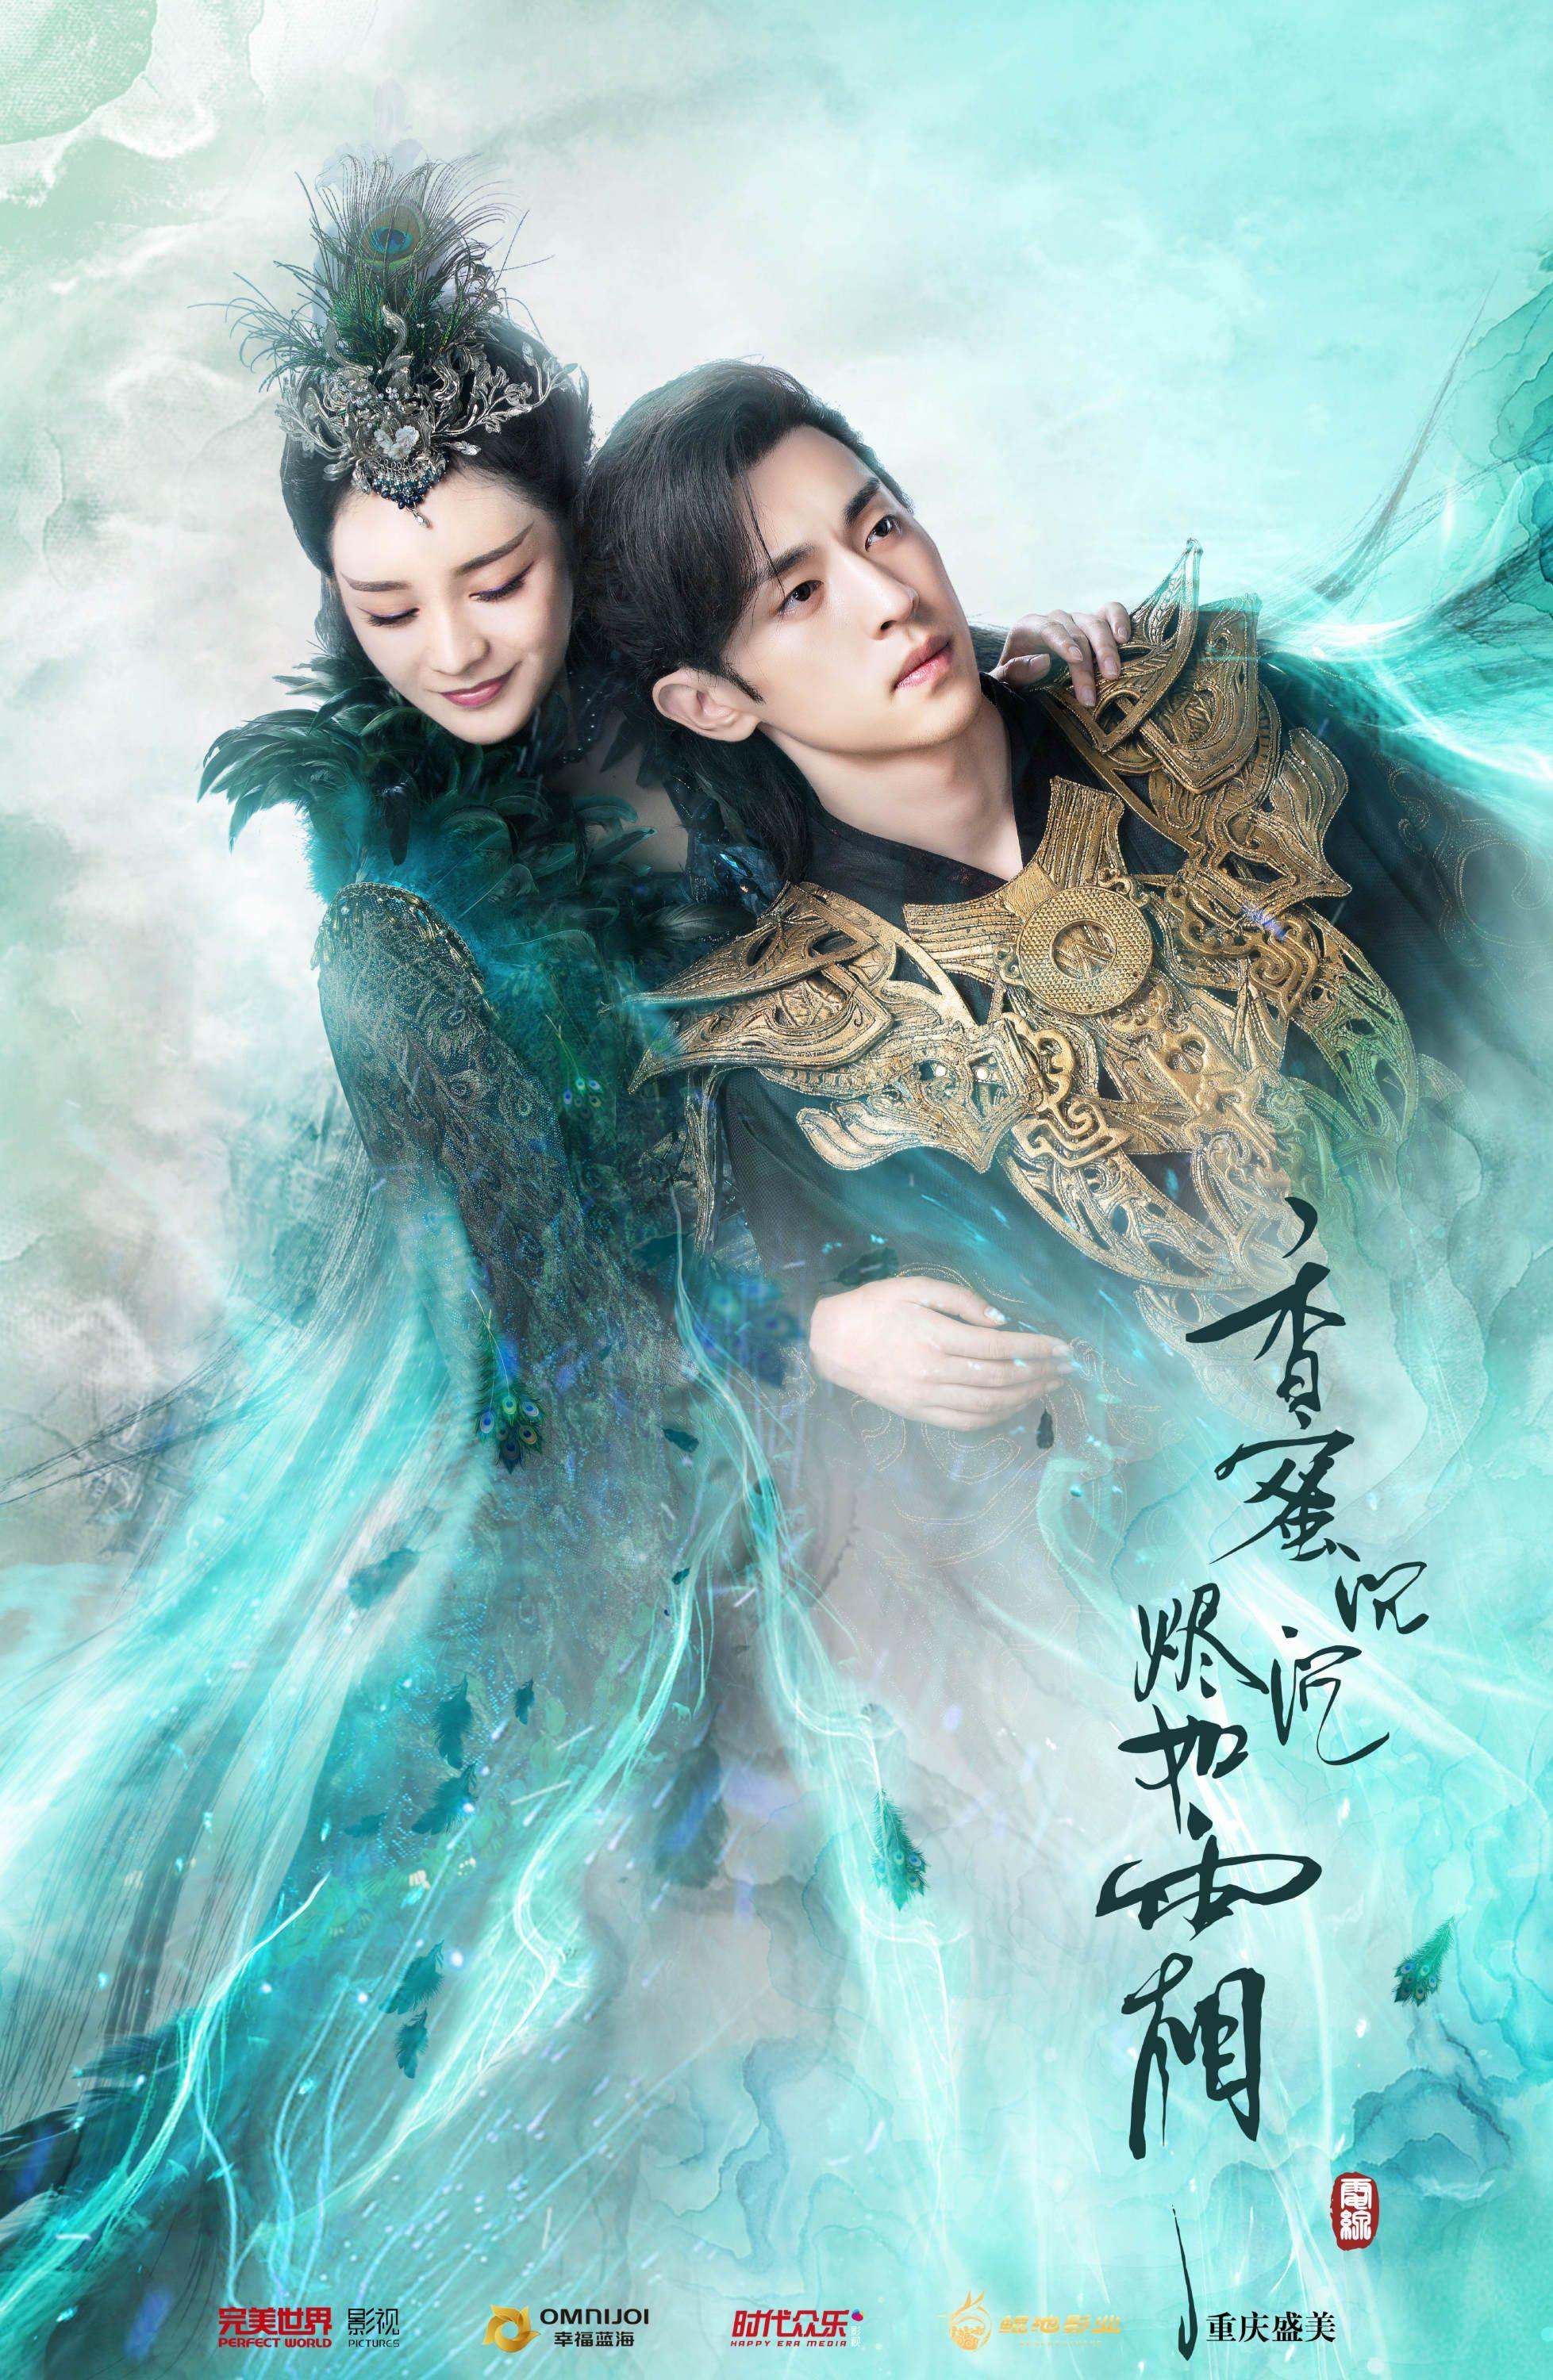 ashes of love 59 eng sub